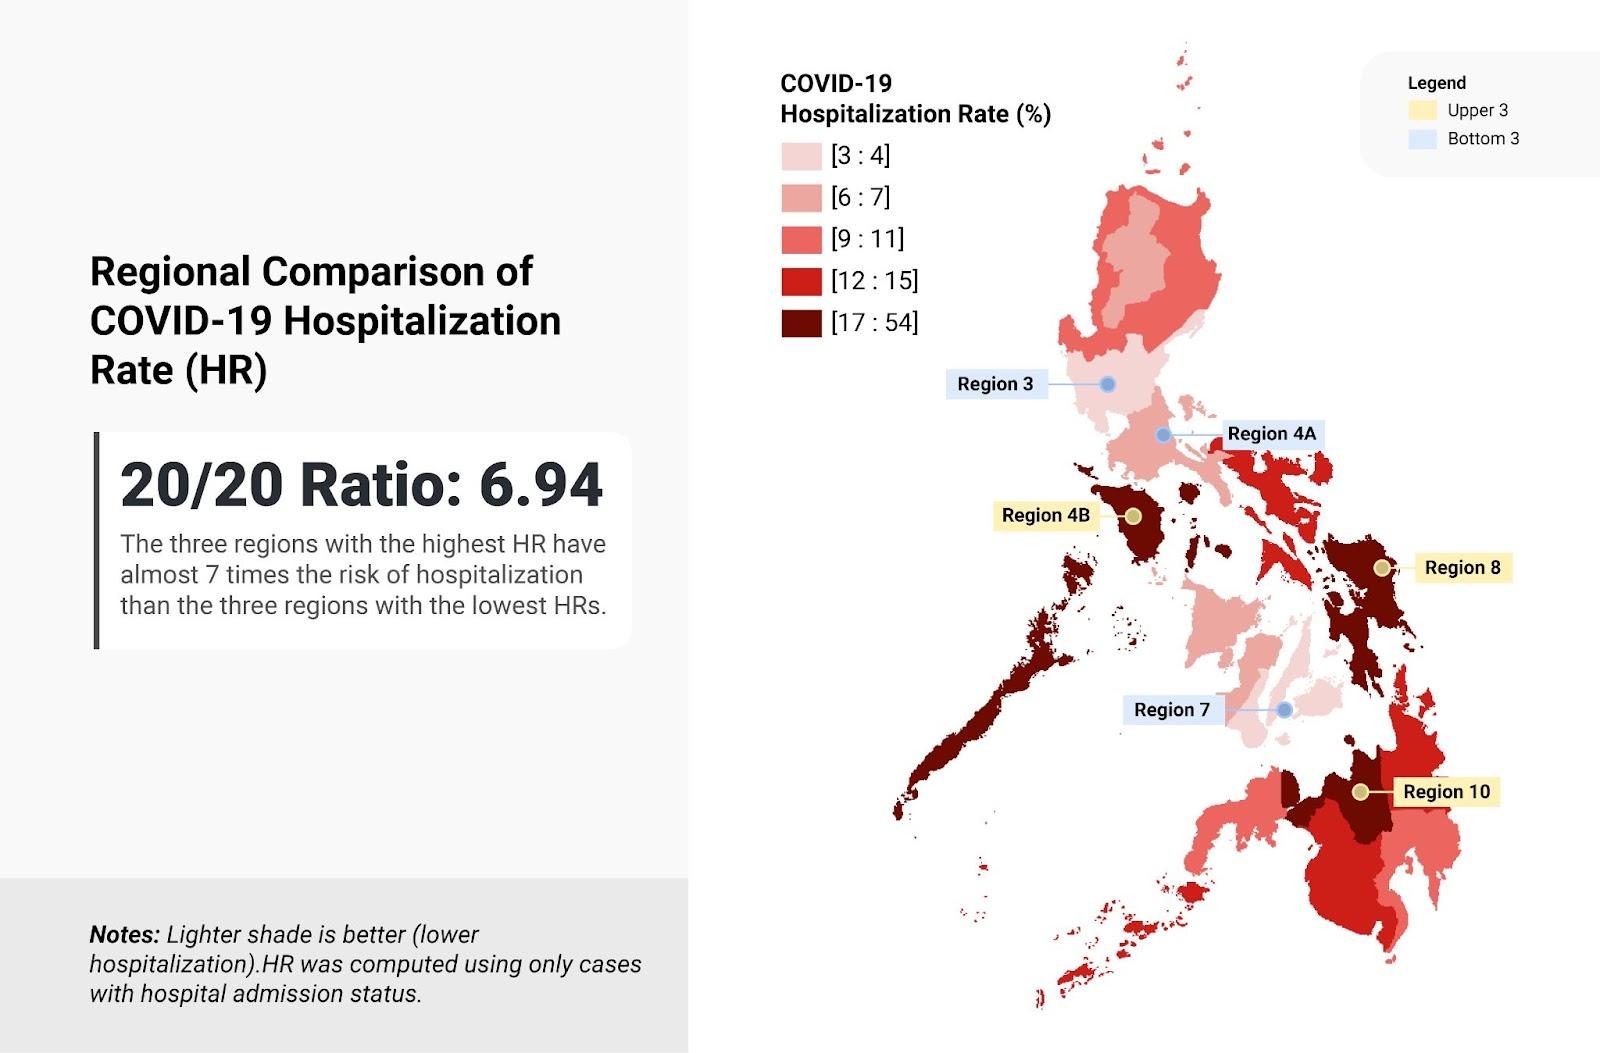 2 years in, pandemic exposes inequities in Philippine health system